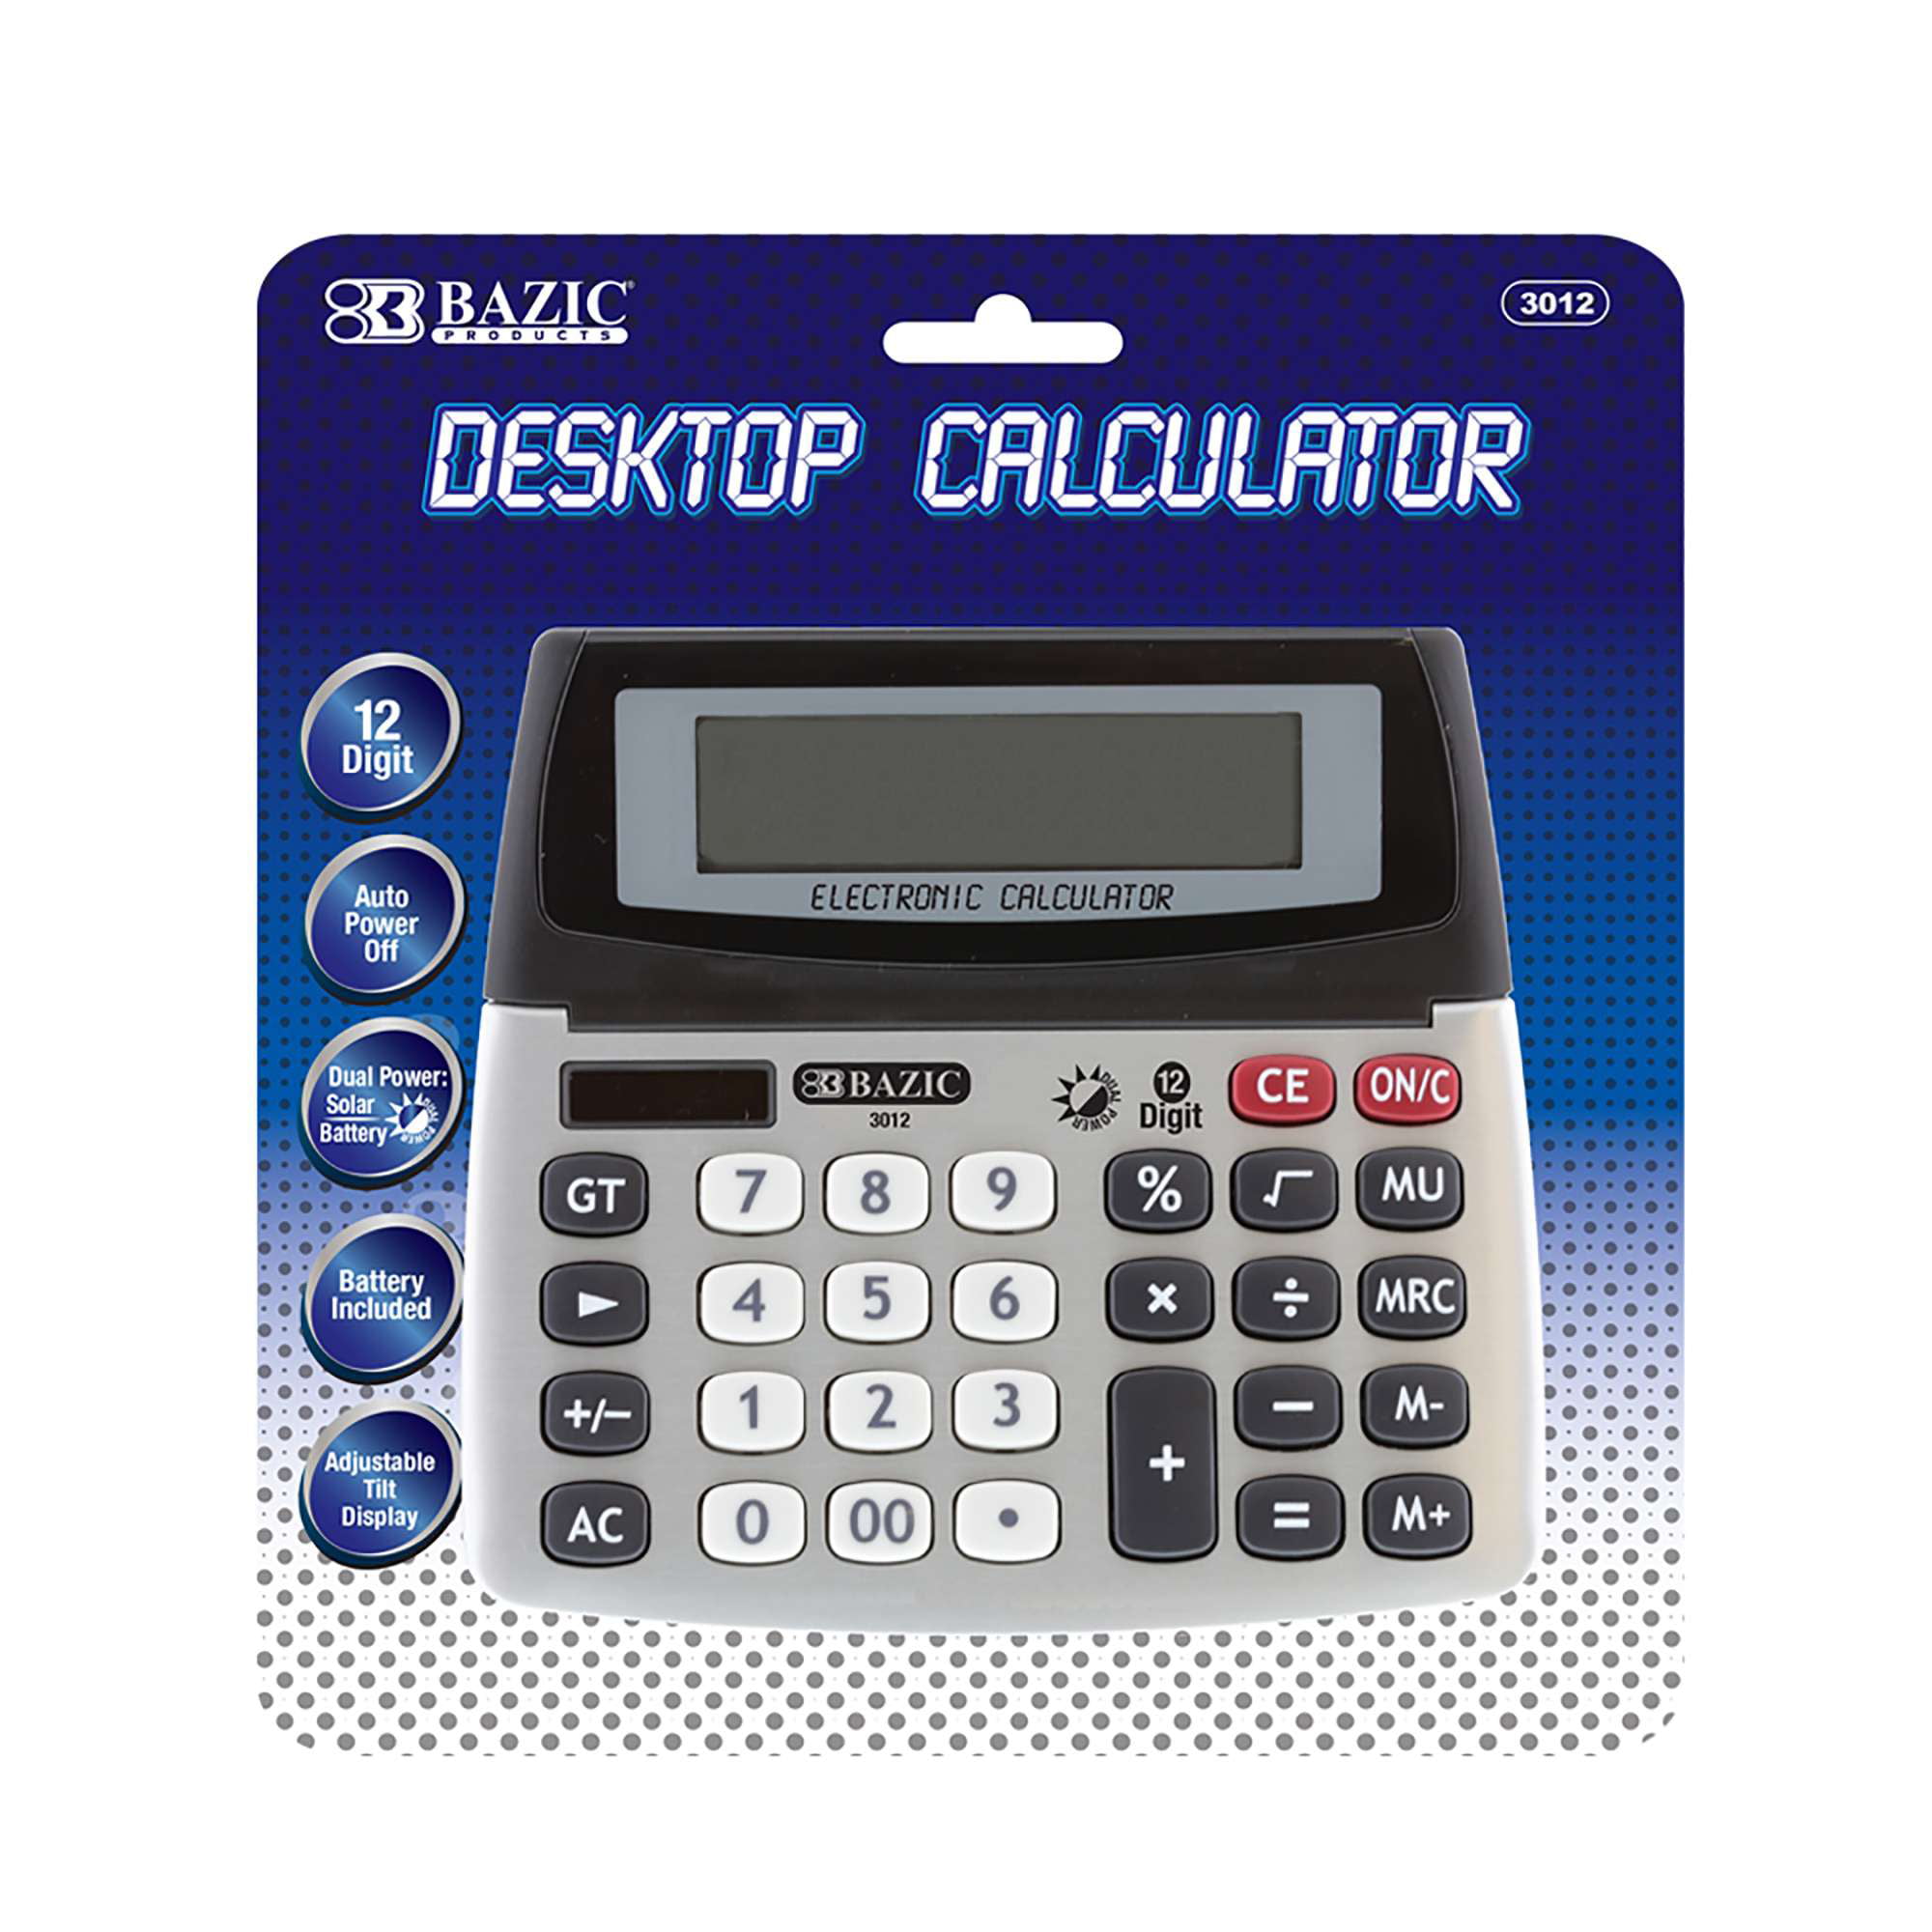 Pen and Calculator Gift Set in Silver Case Digital Battery Powered Calculator 